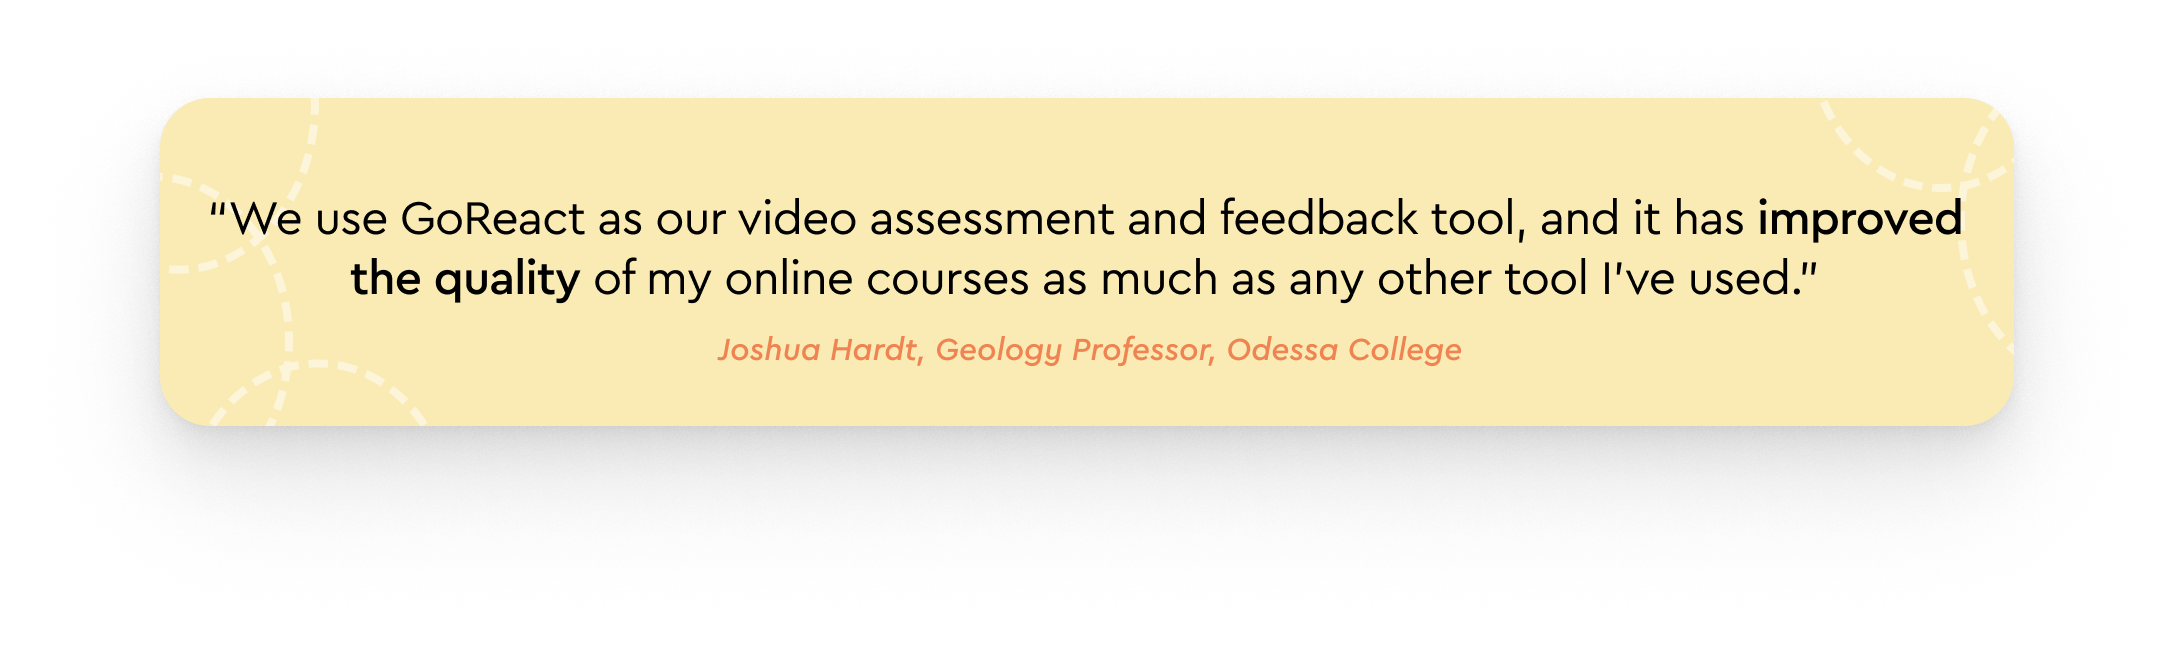 "We use GoReact as our video assessment and feedback tool, and it has improved the quality of my online courses as much as any other tool I've used. My students can ask questions right at the moment they have them while watching my lectures. This ability to communicate instantly helps them grasp complex concepts much more effectively."